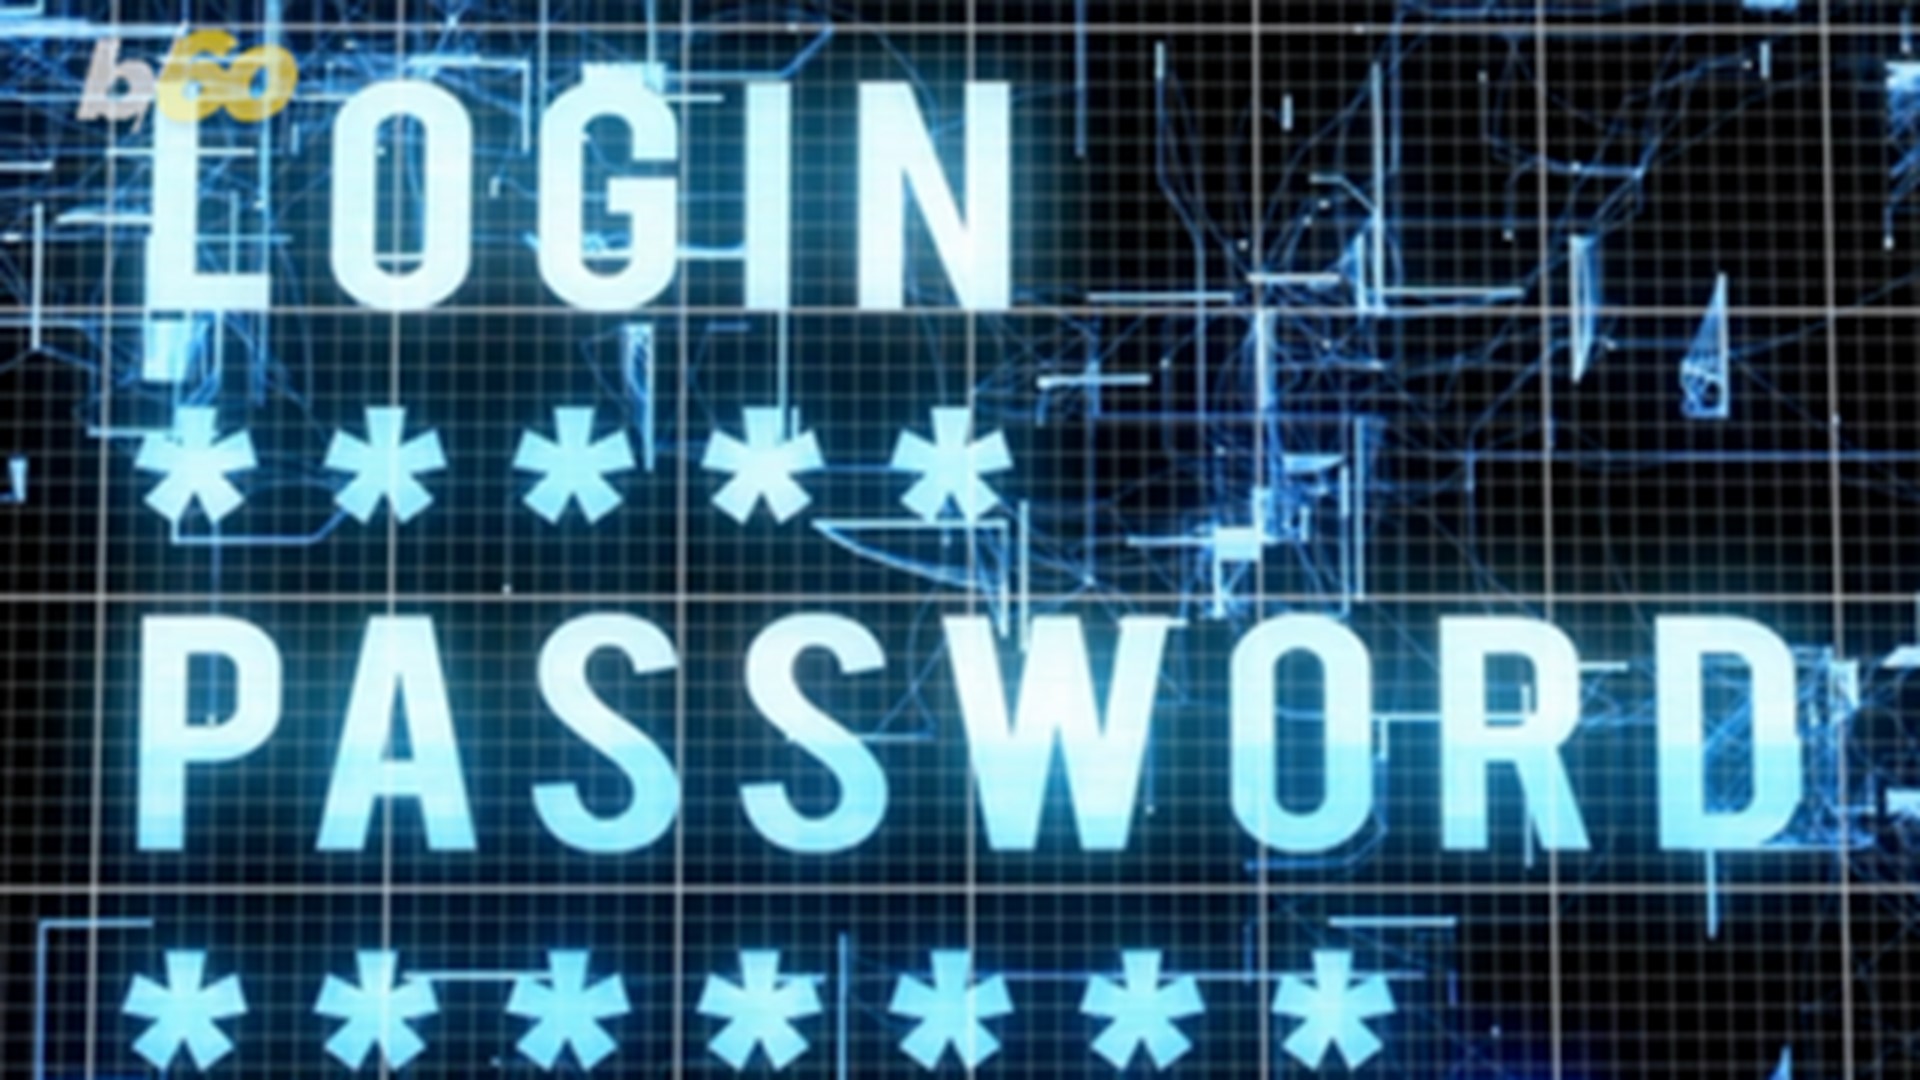 A new study shows how cellphones can help hackers figure out passwords over 40% of the time.